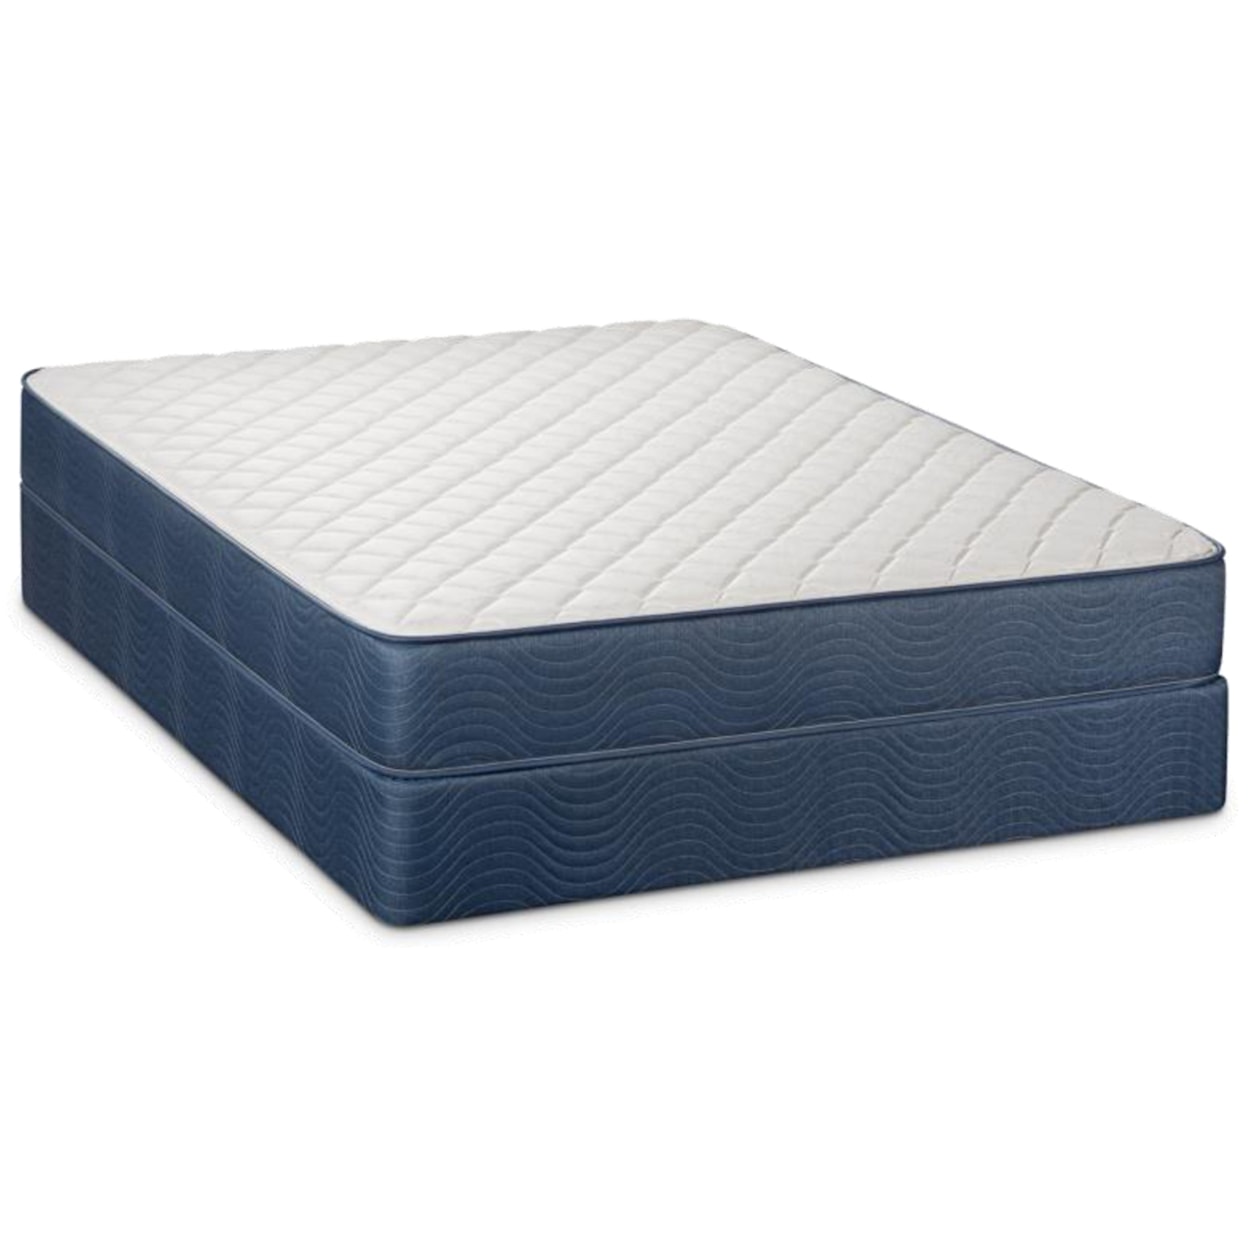 Restonic Sumner Firm Twin 9" Firm Two Sided Mattress Set